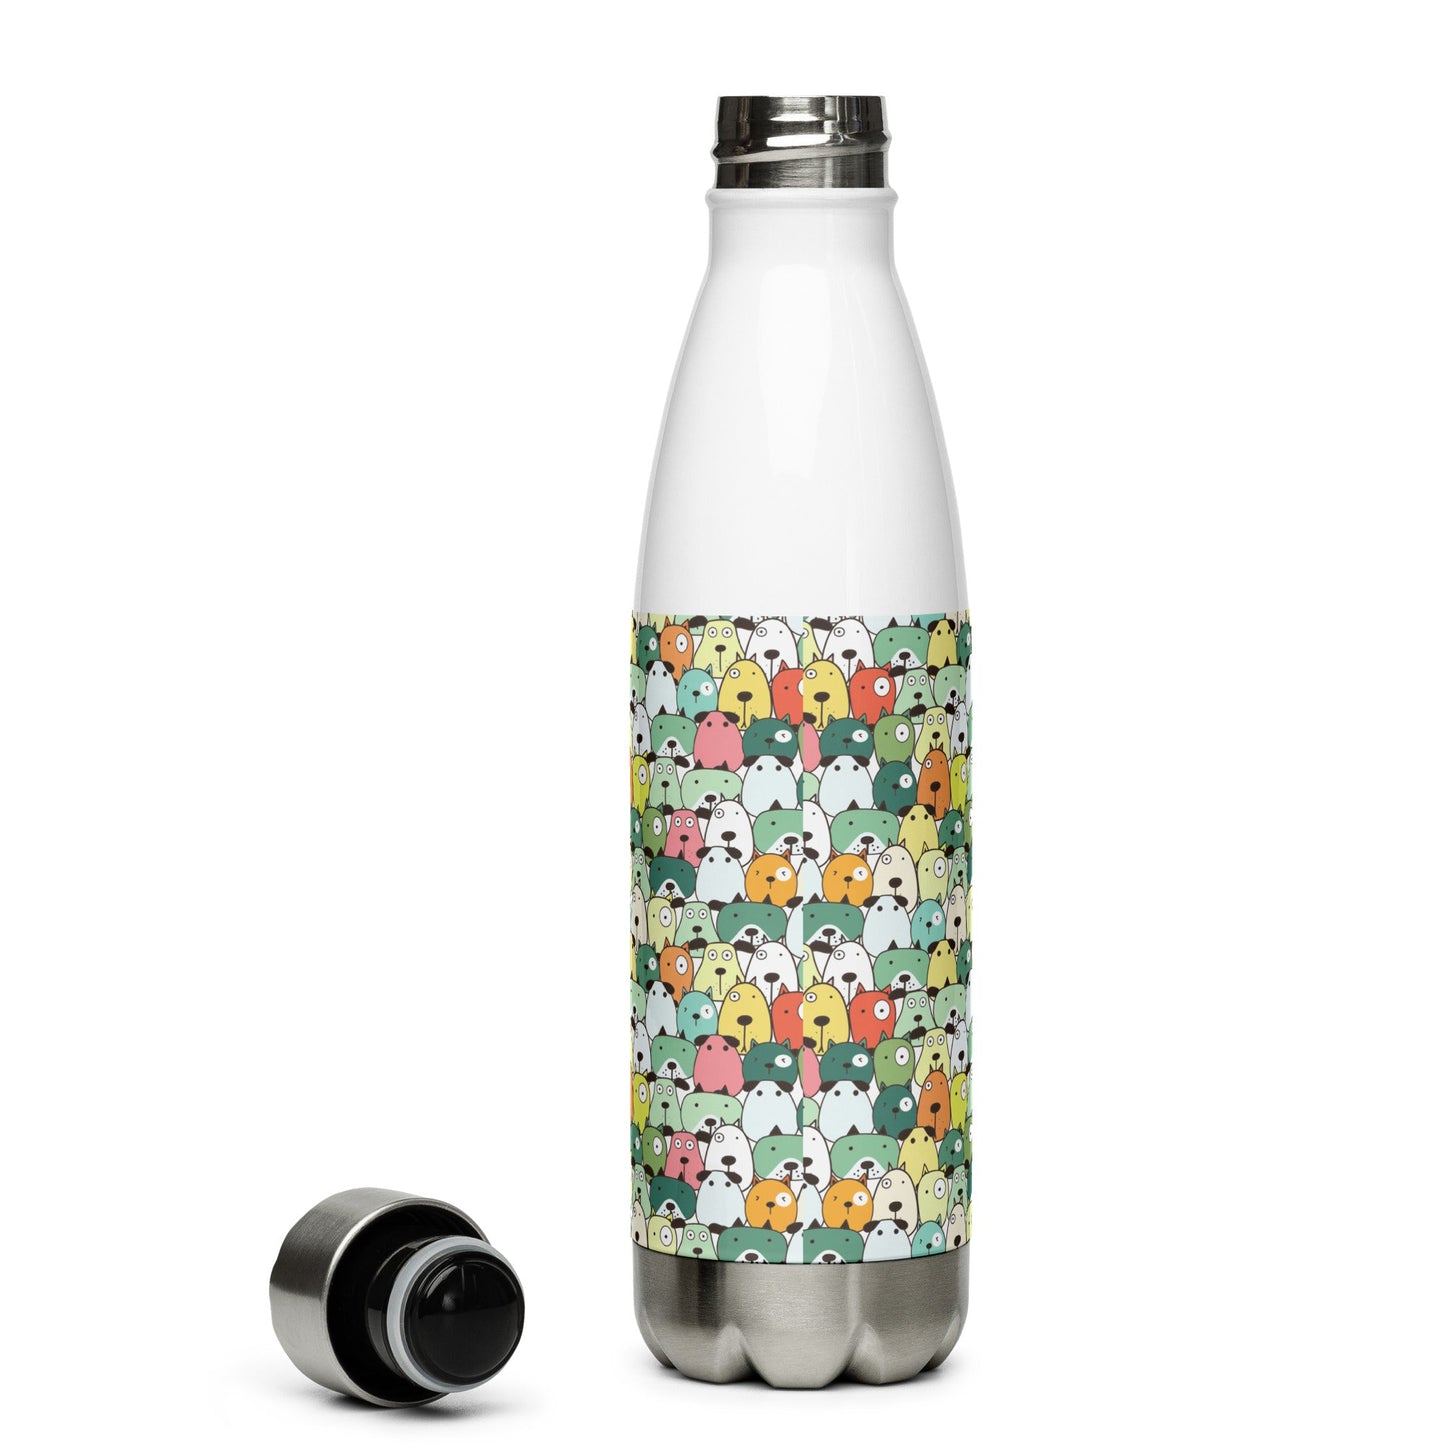 Green Cartoon Dogs Stainless Steel Water Bottle - DoggyLoveandMore